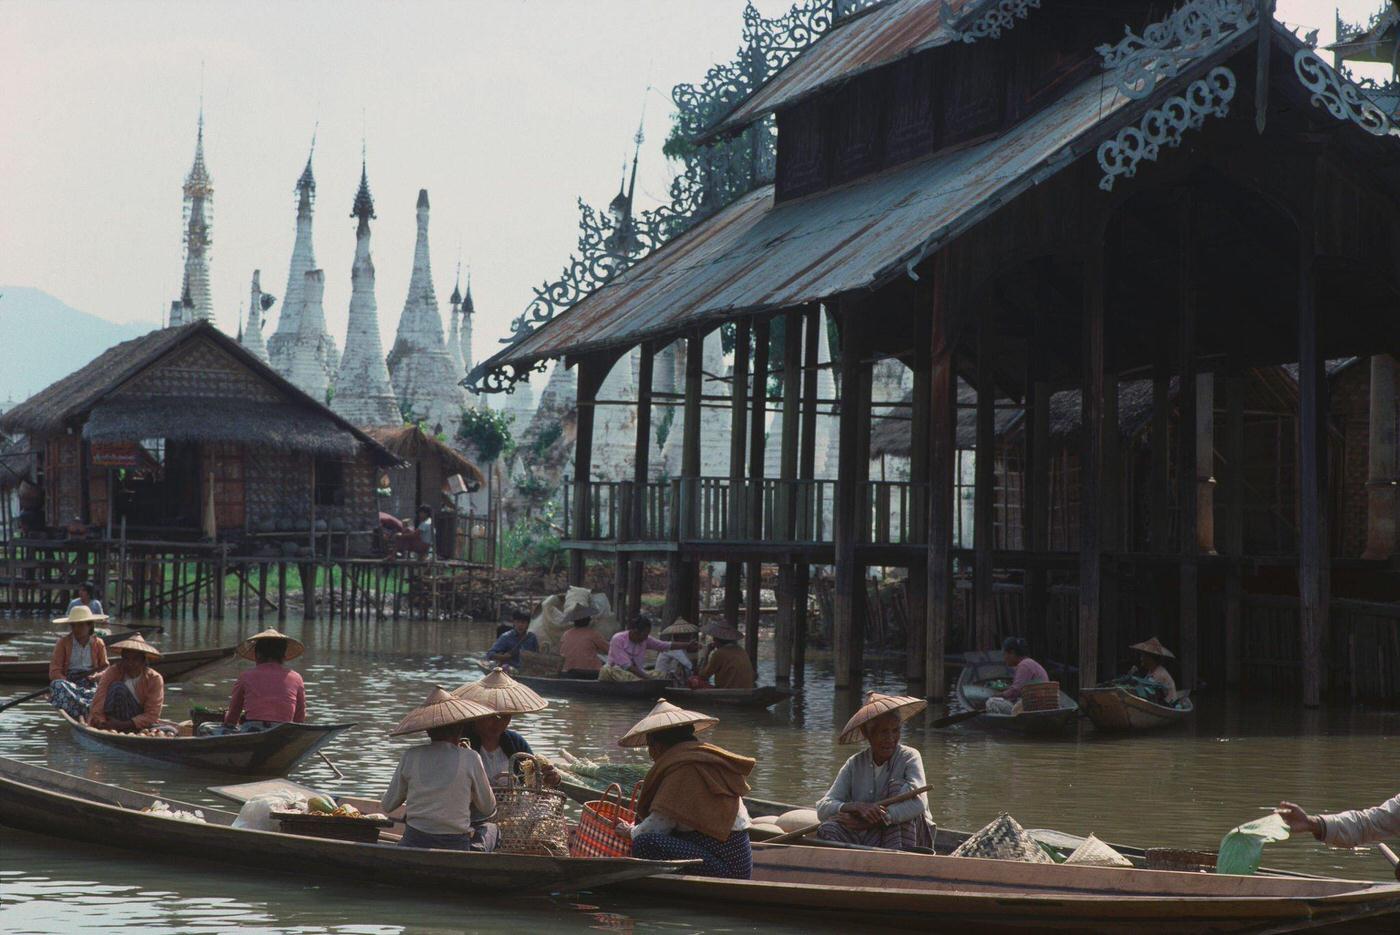 A floating market on Inle Lake in Burma, with a temple in the background, 1988.